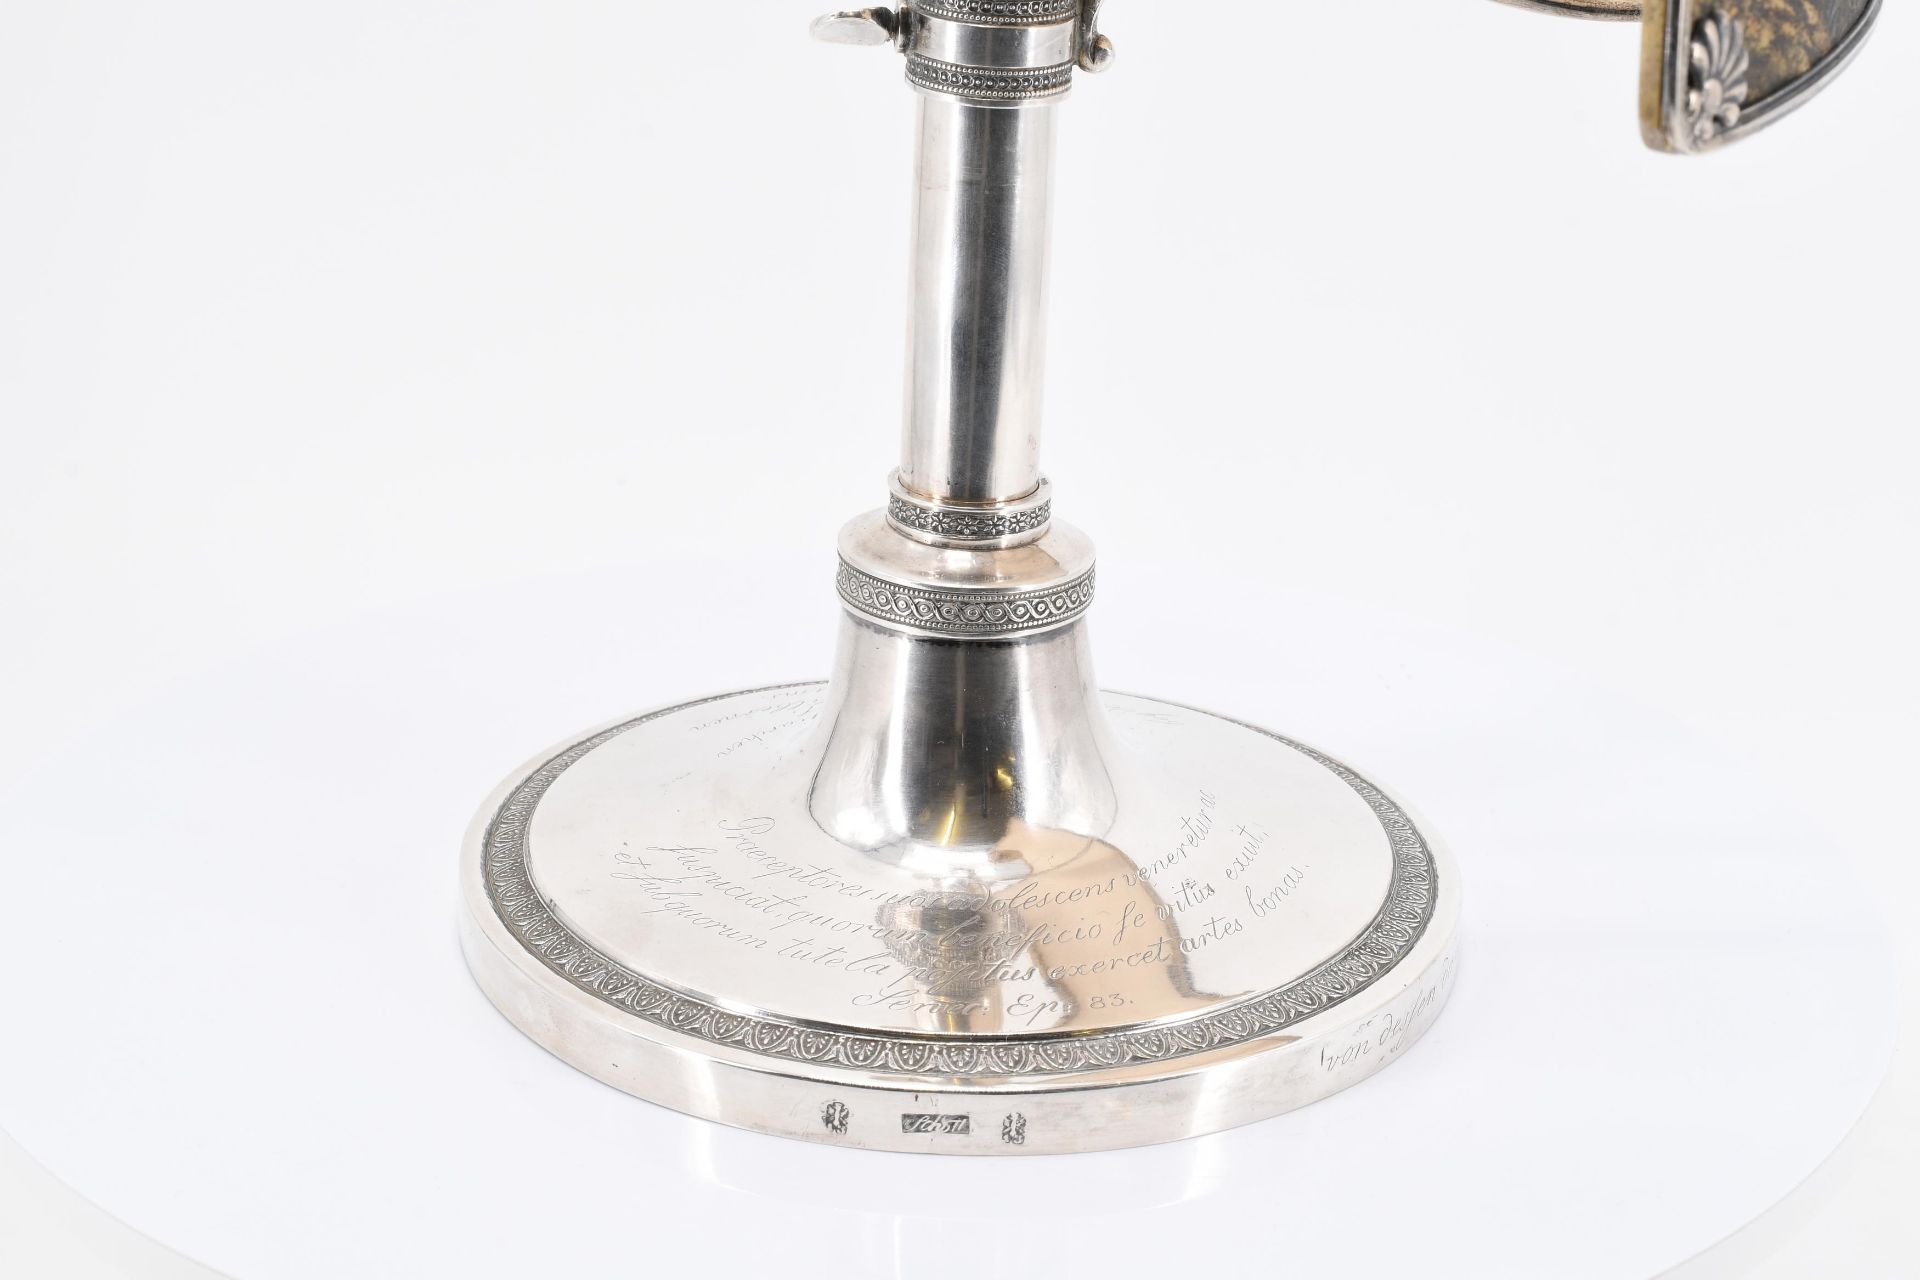 Two-flame candlestick with light shade - Image 6 of 8